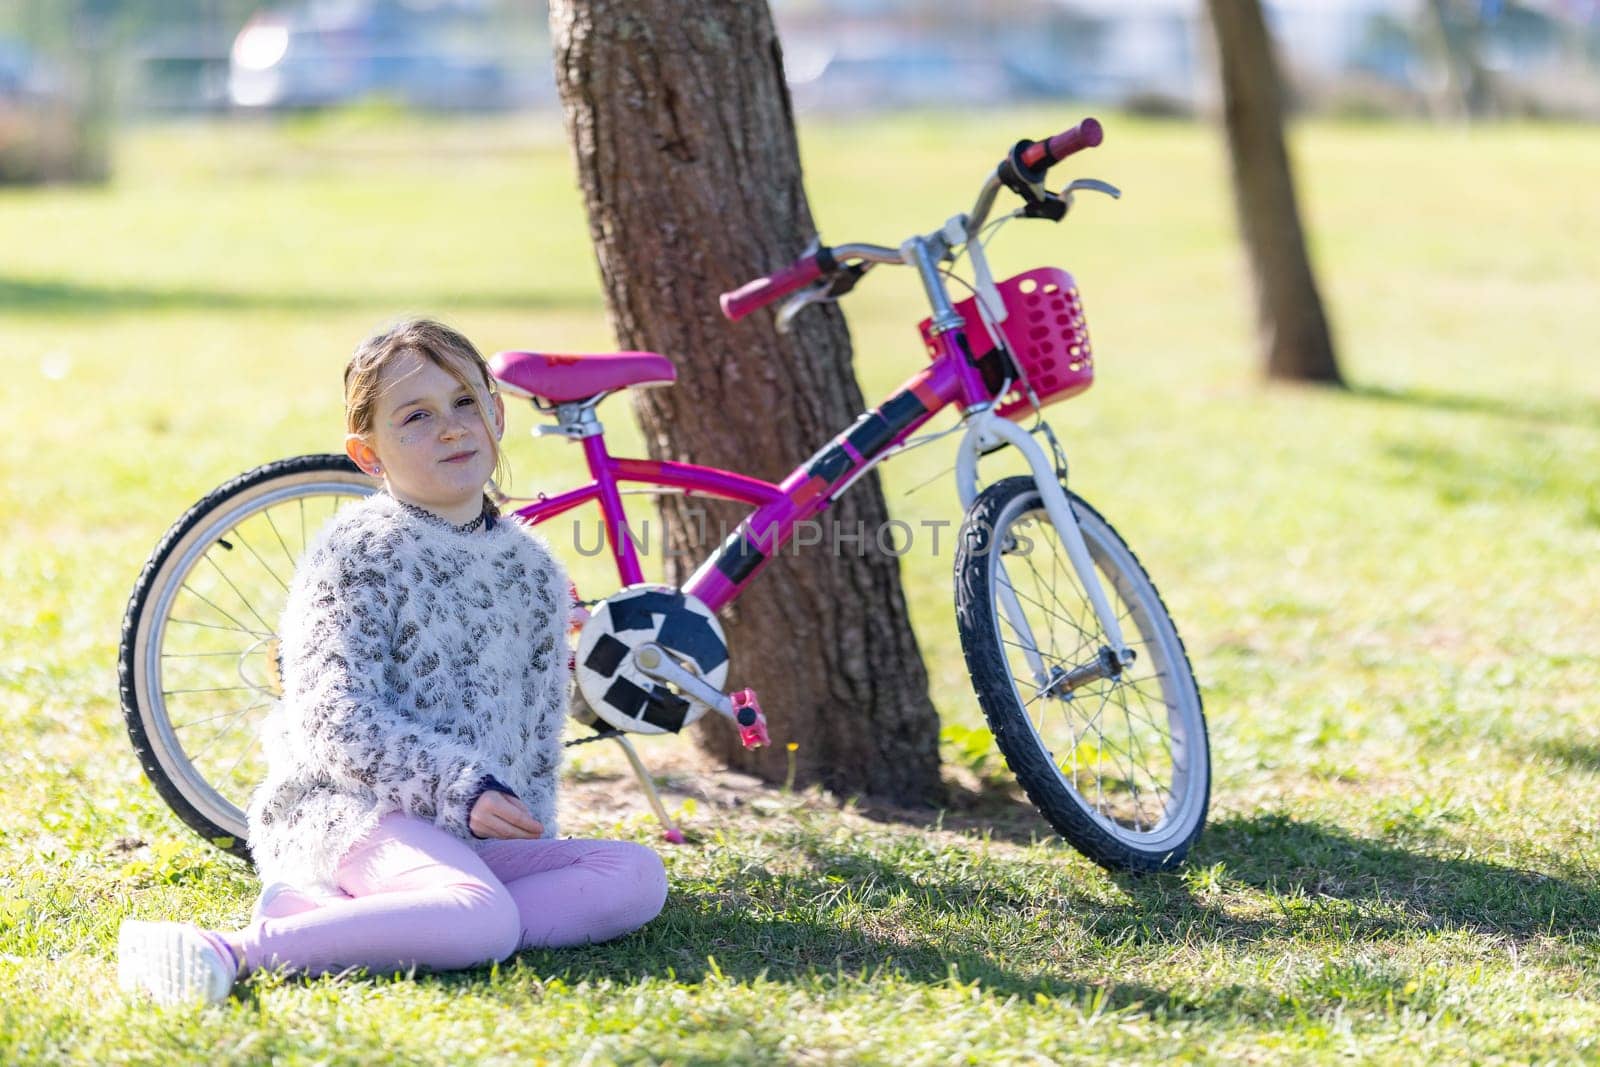 A young girl sits on the grass next to a pink bicycle. The girl is wearing a white sweater and pink pants